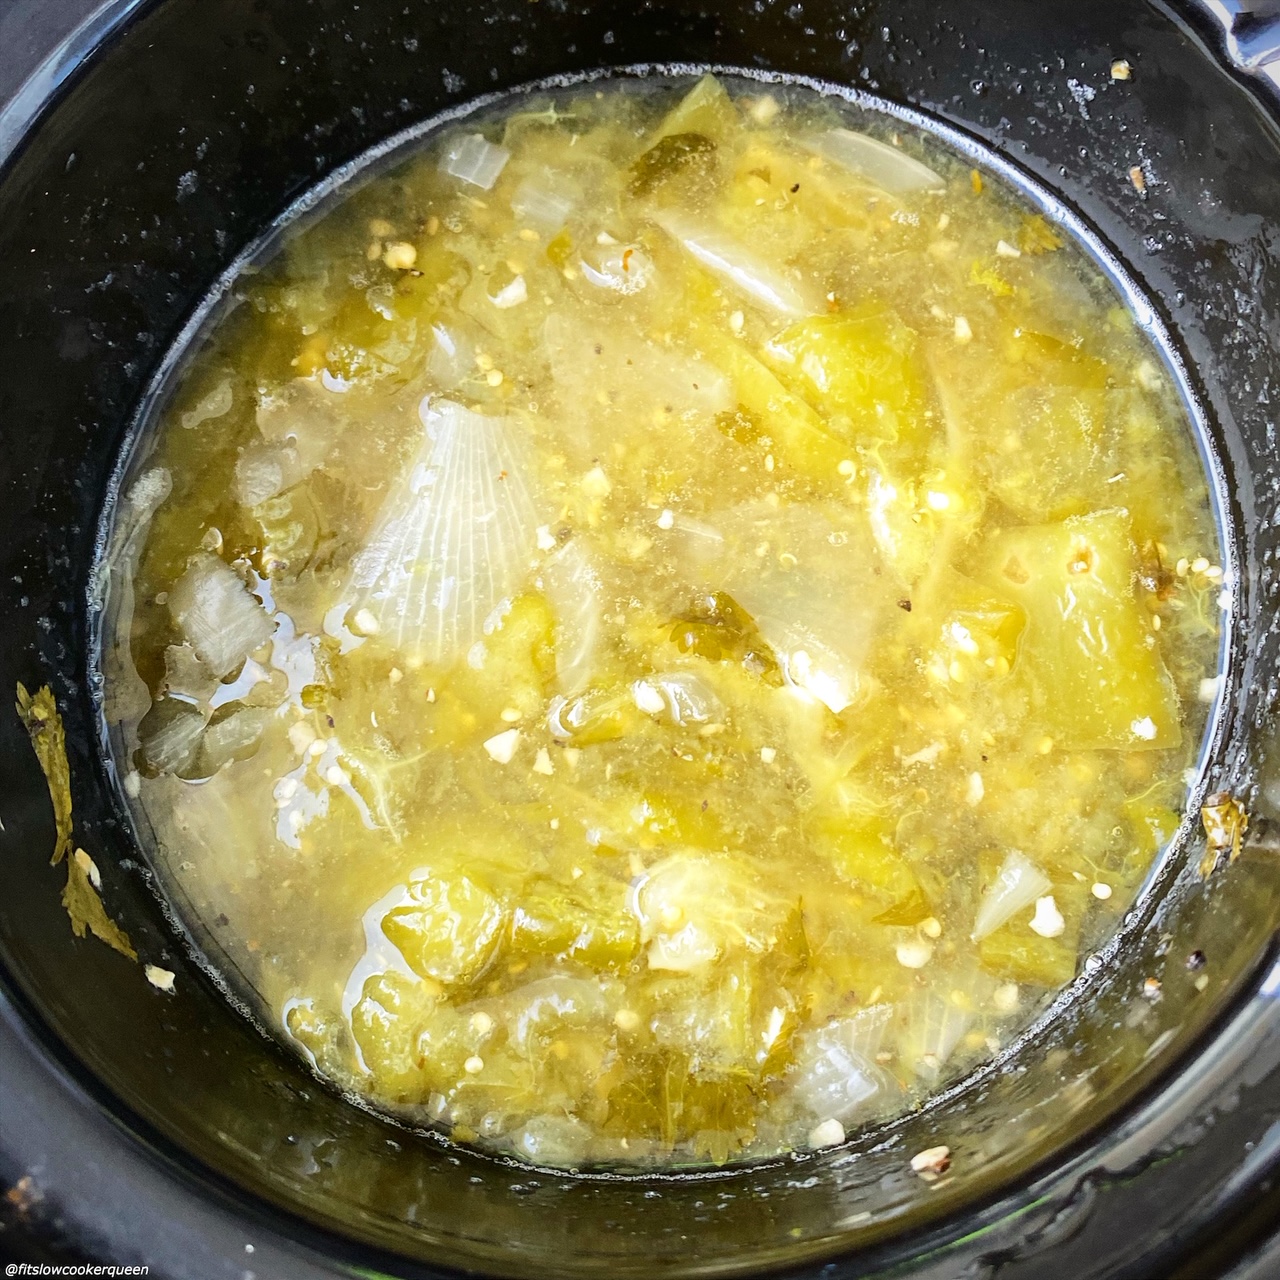 after pic of cooked food for Slow Cooker Instant Pot Salsa Verde (Low-Carb, Paleo, Whole30) in the slow cooke